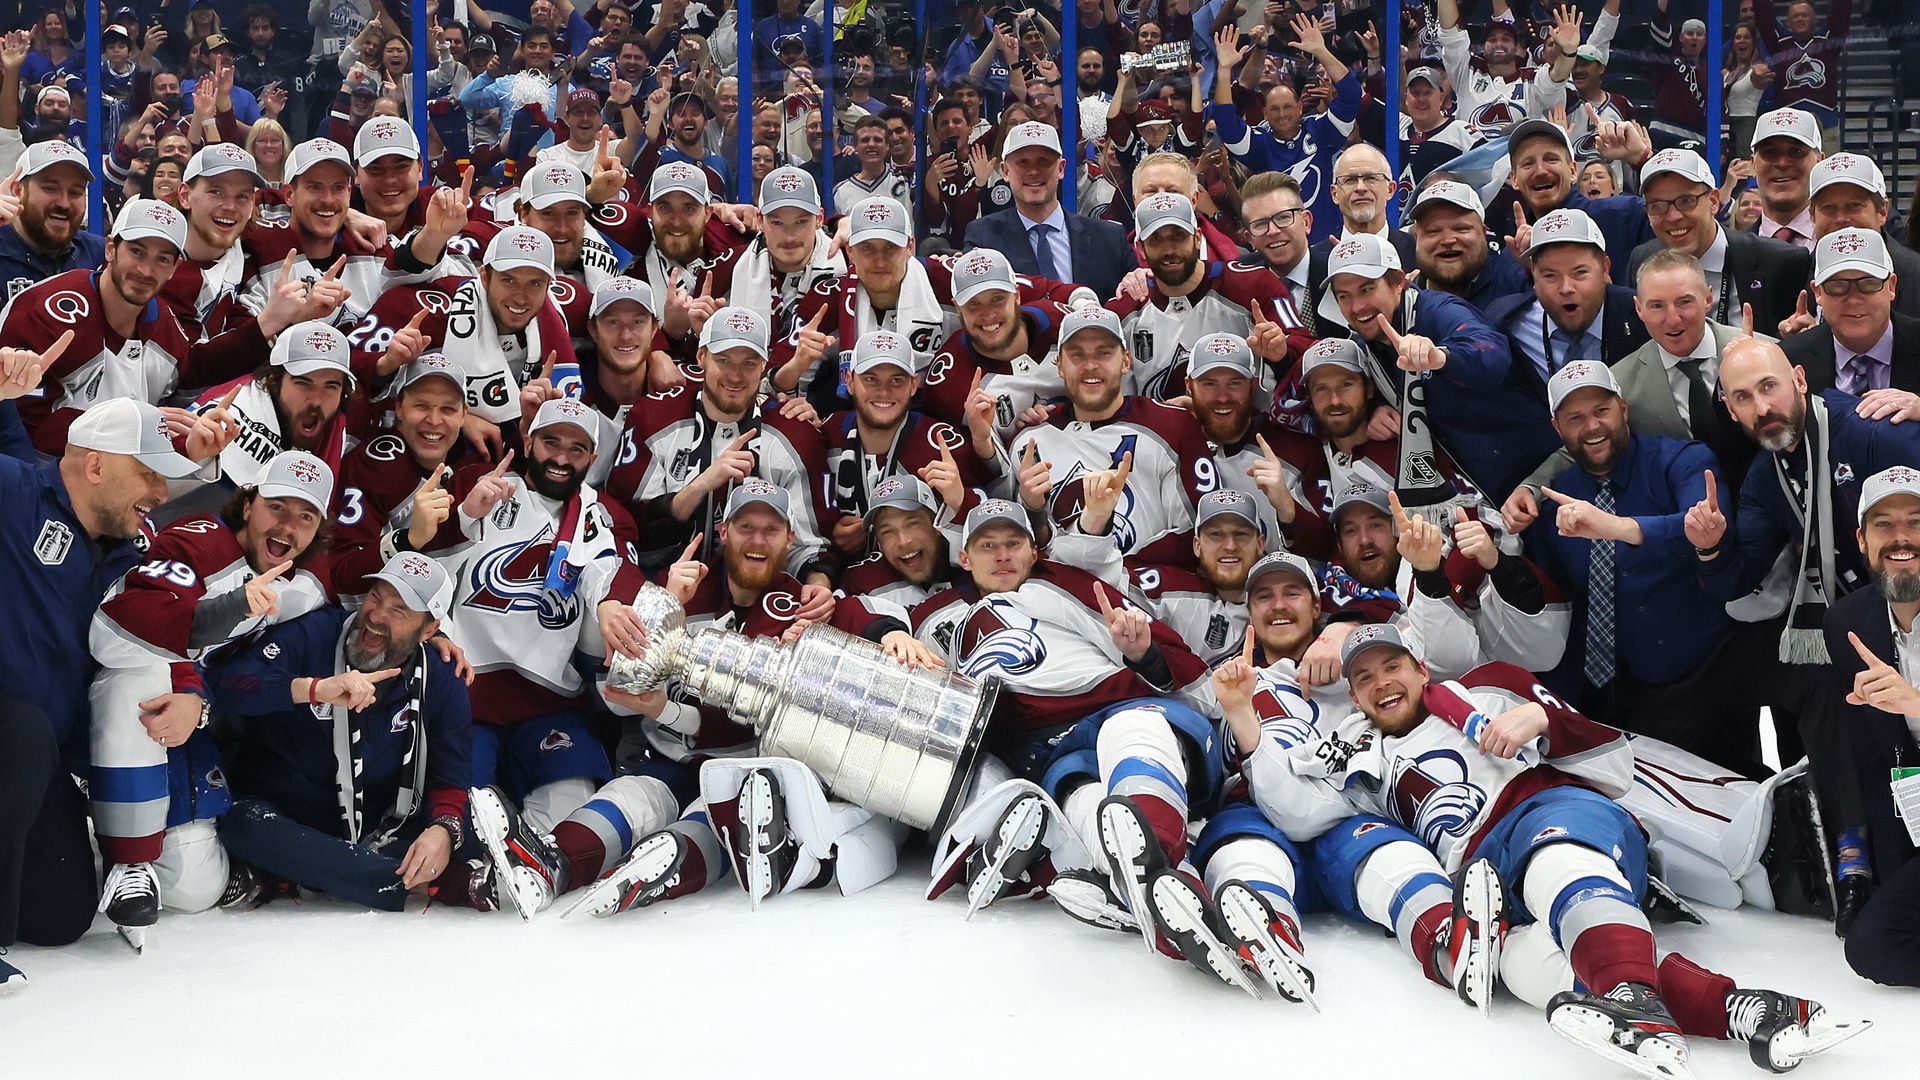 The Colorado Avalanche pose with the Stanley Cup.